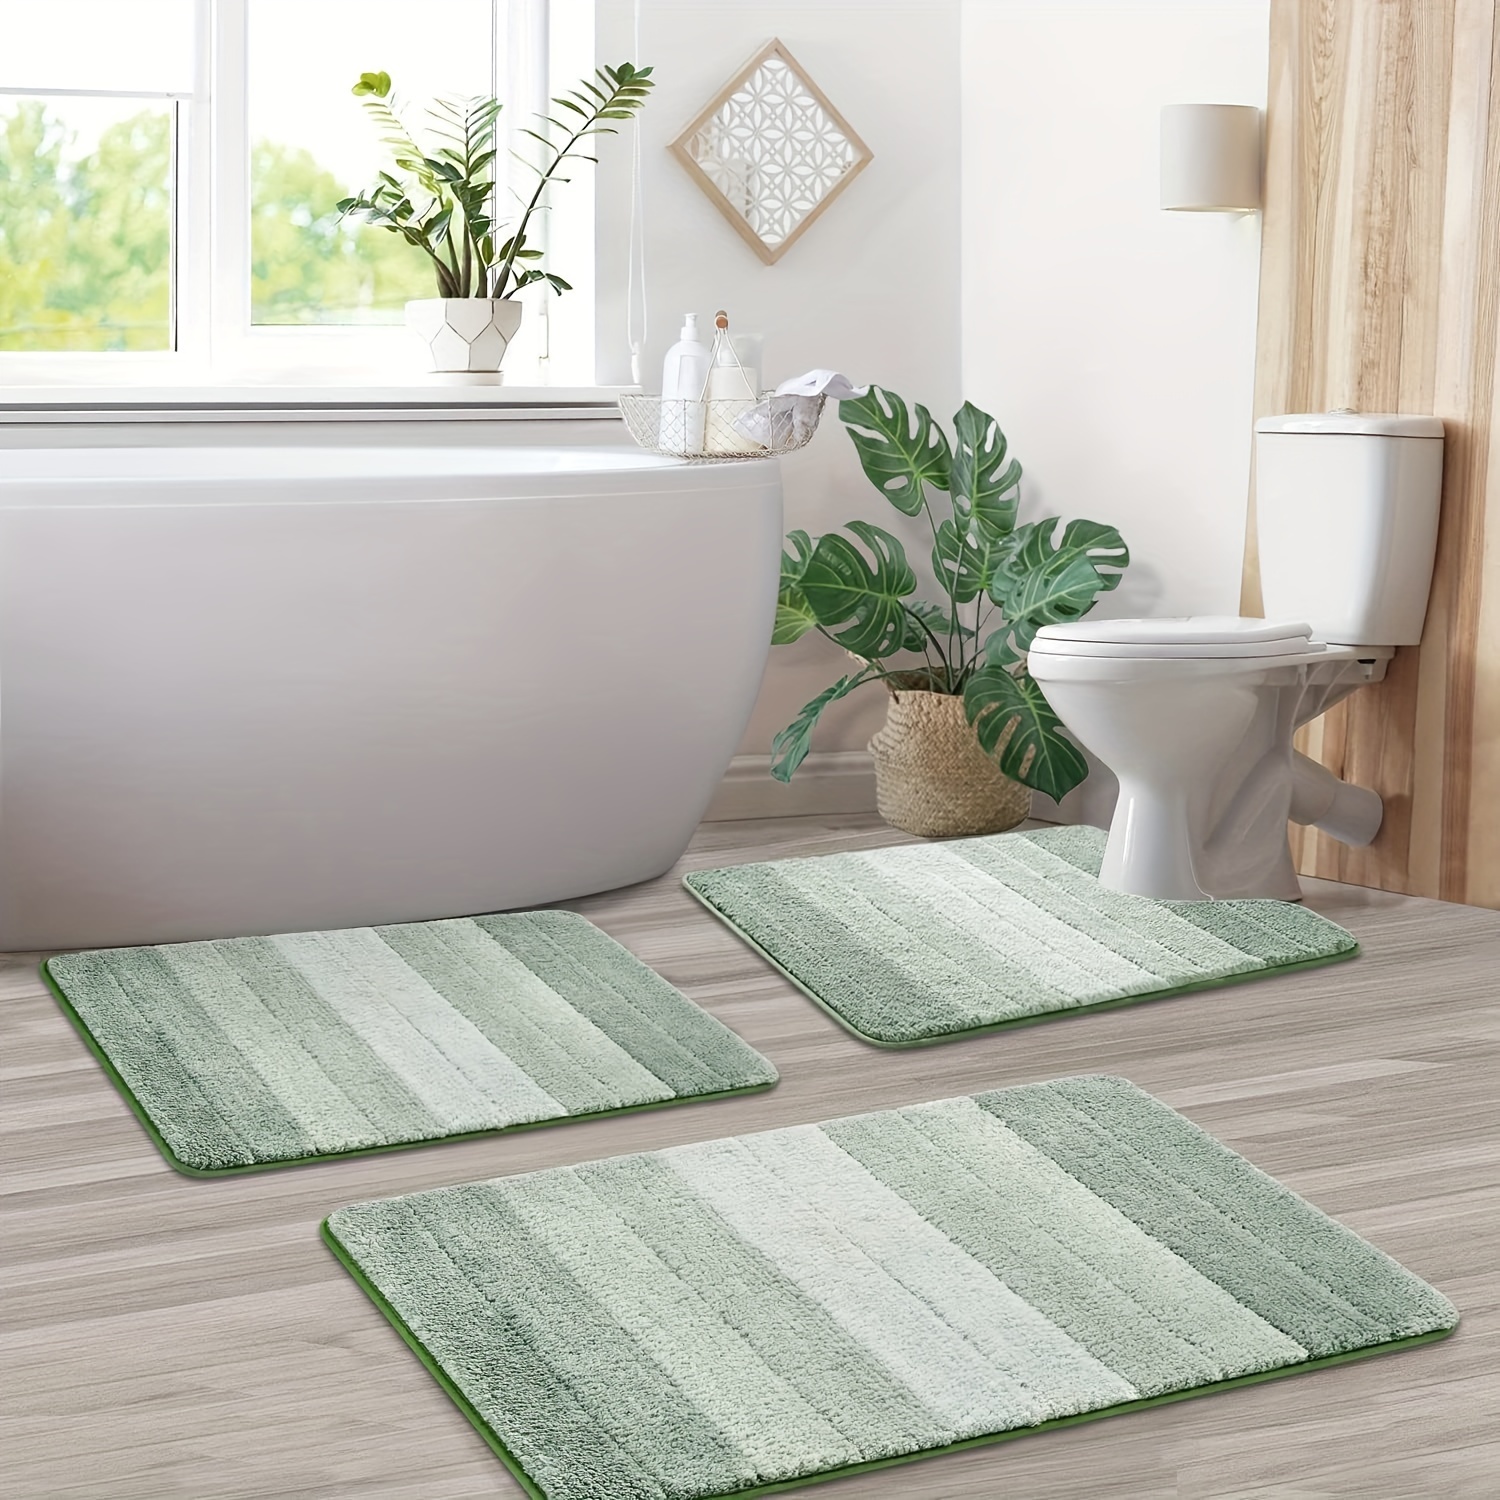 

3-piece Bathroom Rug Set - Ultra Soft, Quick-dry & Absorbent Mats With U-shaped Contour For Toilet - Non-slip, Machine Washable For Bedroom, Living Room & Entryway